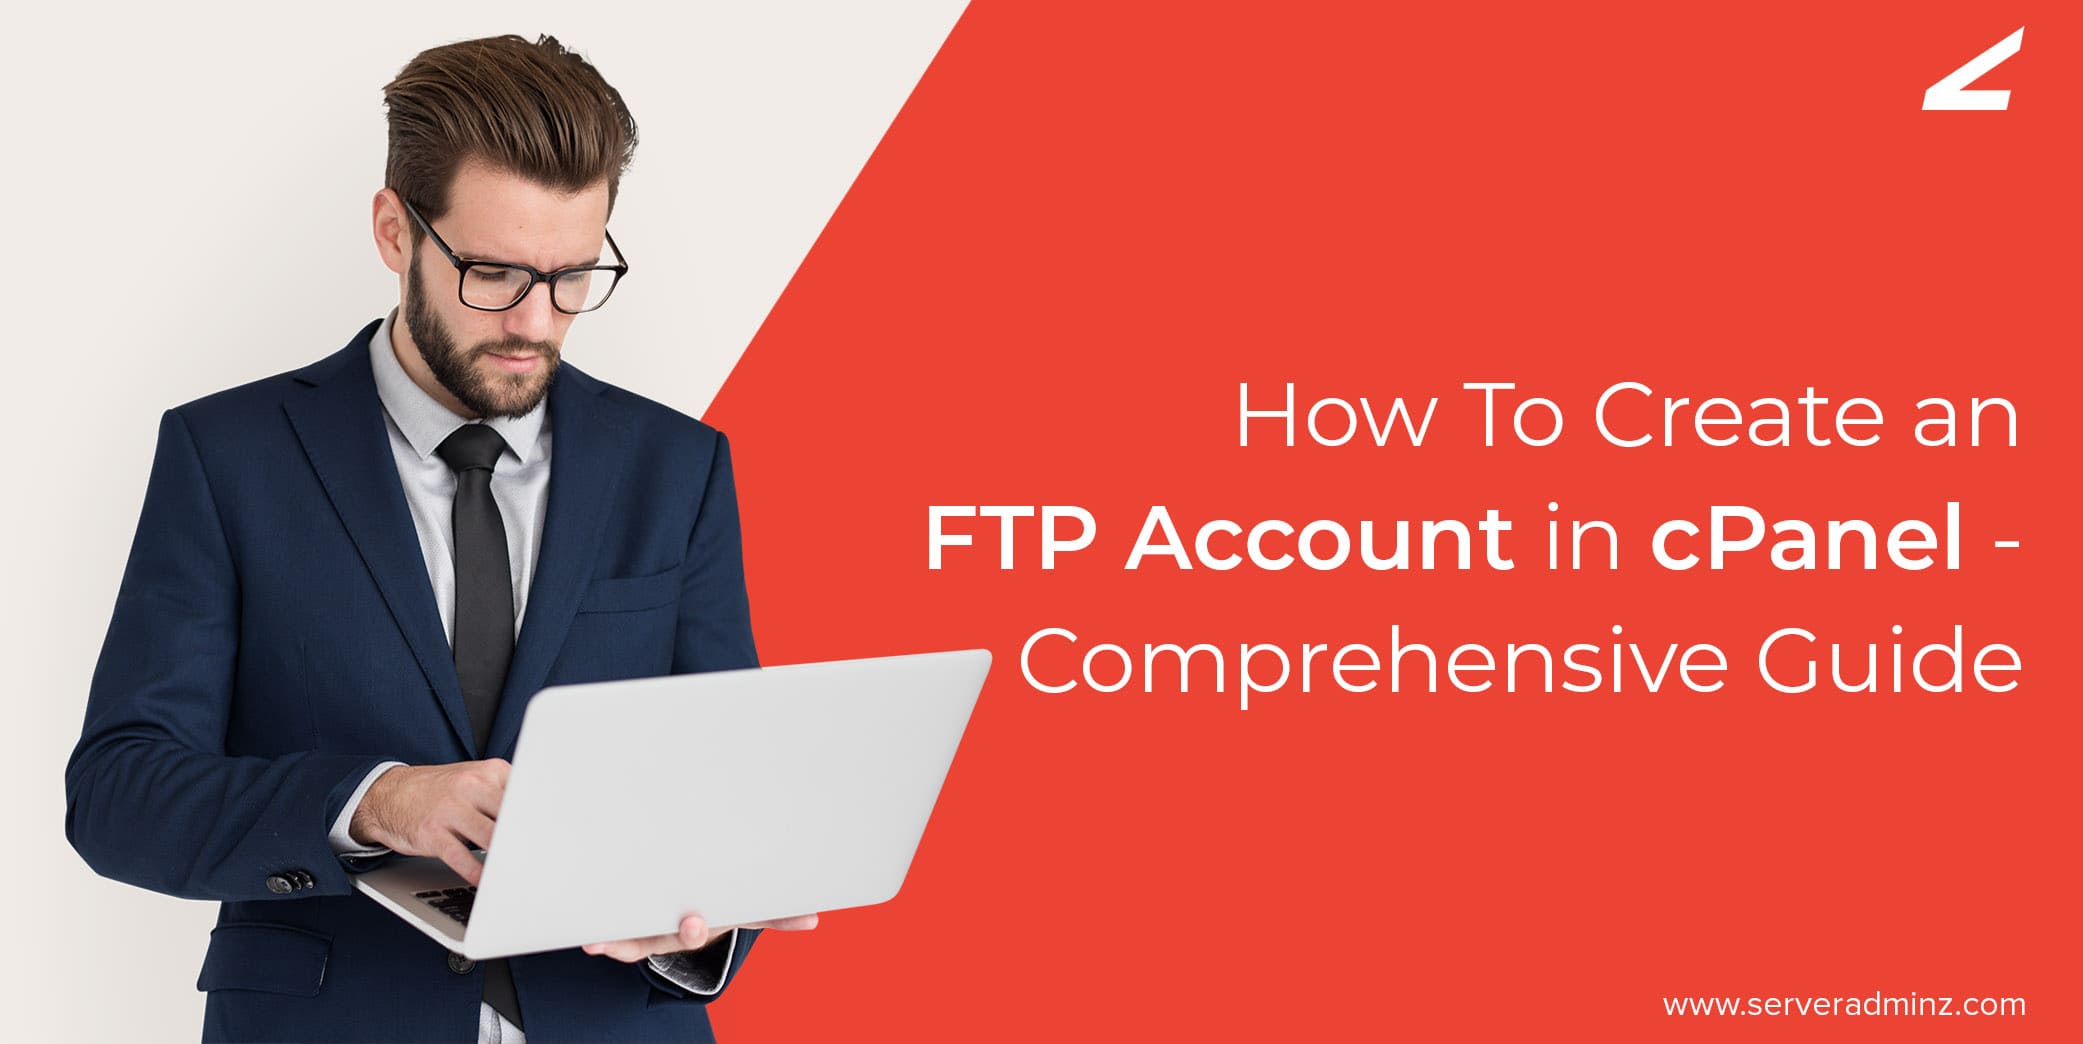 how to create an FTP account in cPanel